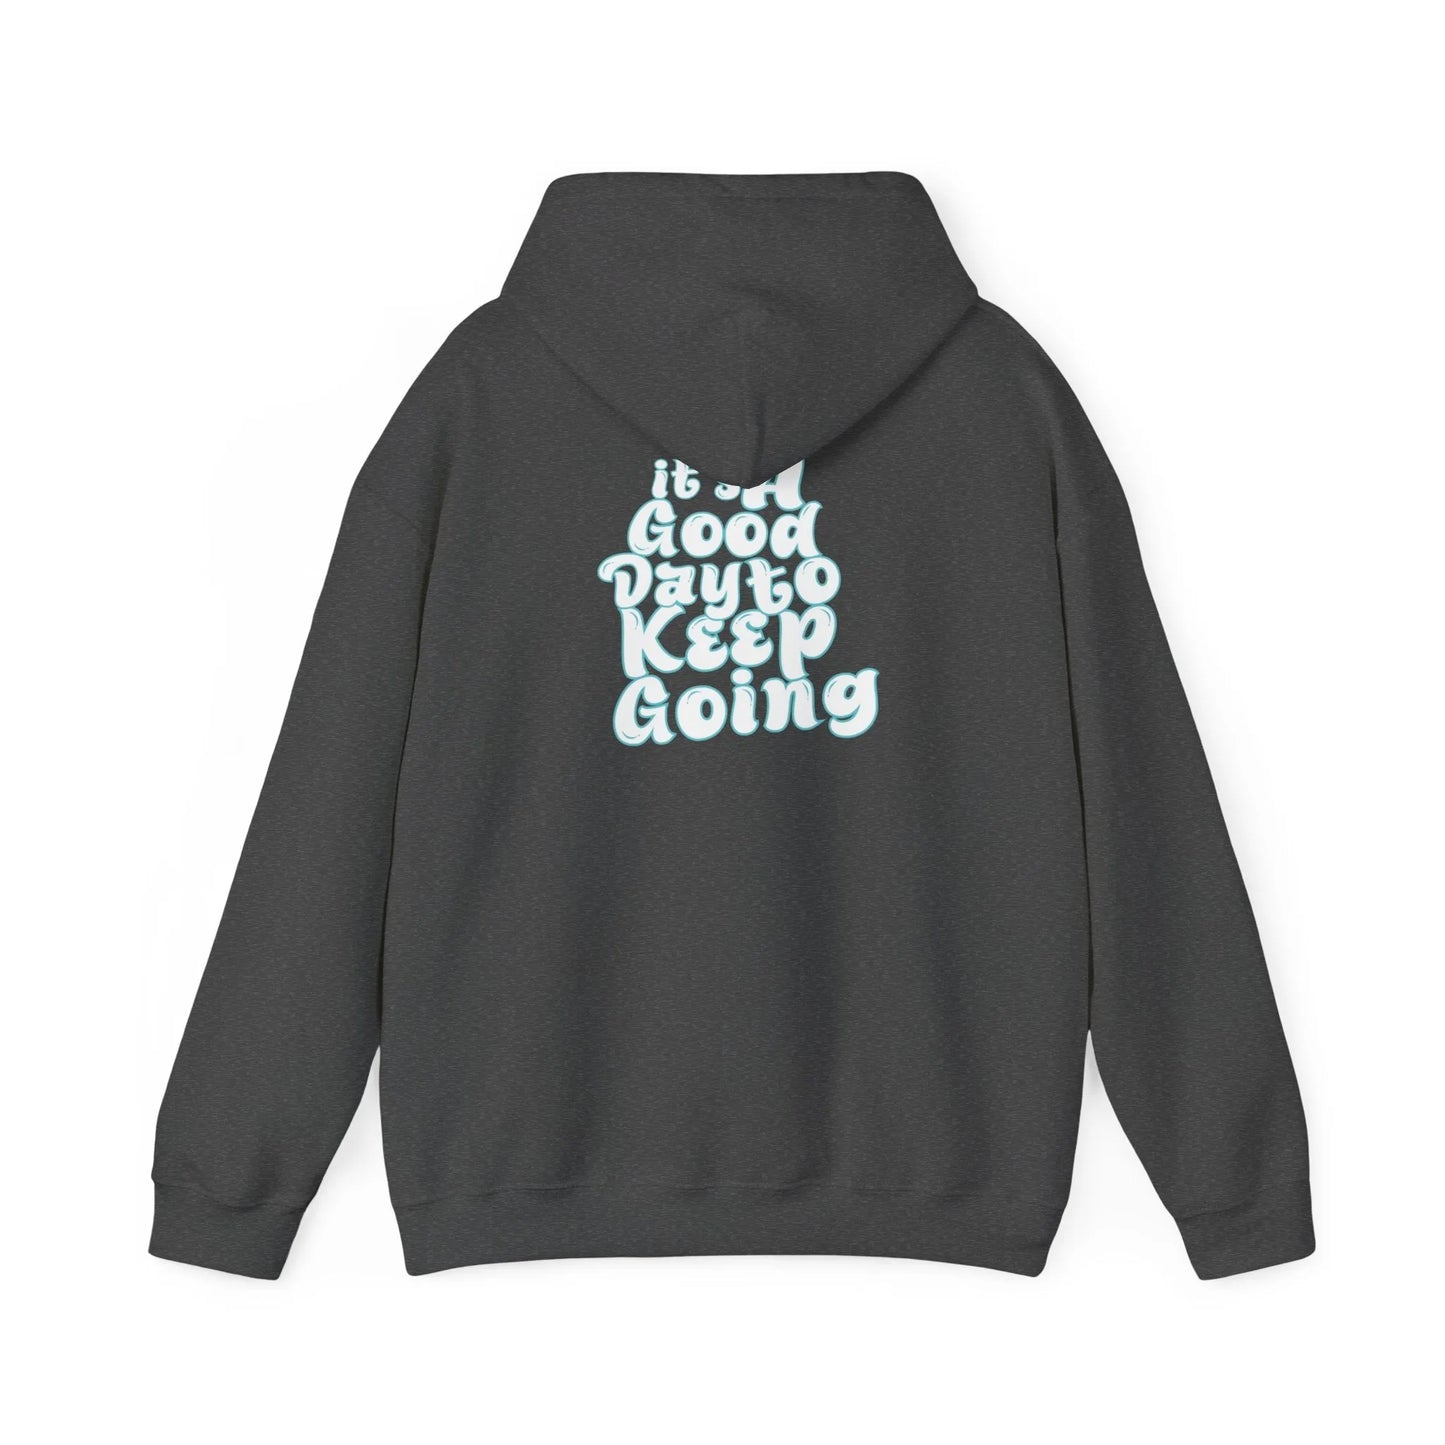 It's A Good Day To Keep Going Hoodie Turquoise